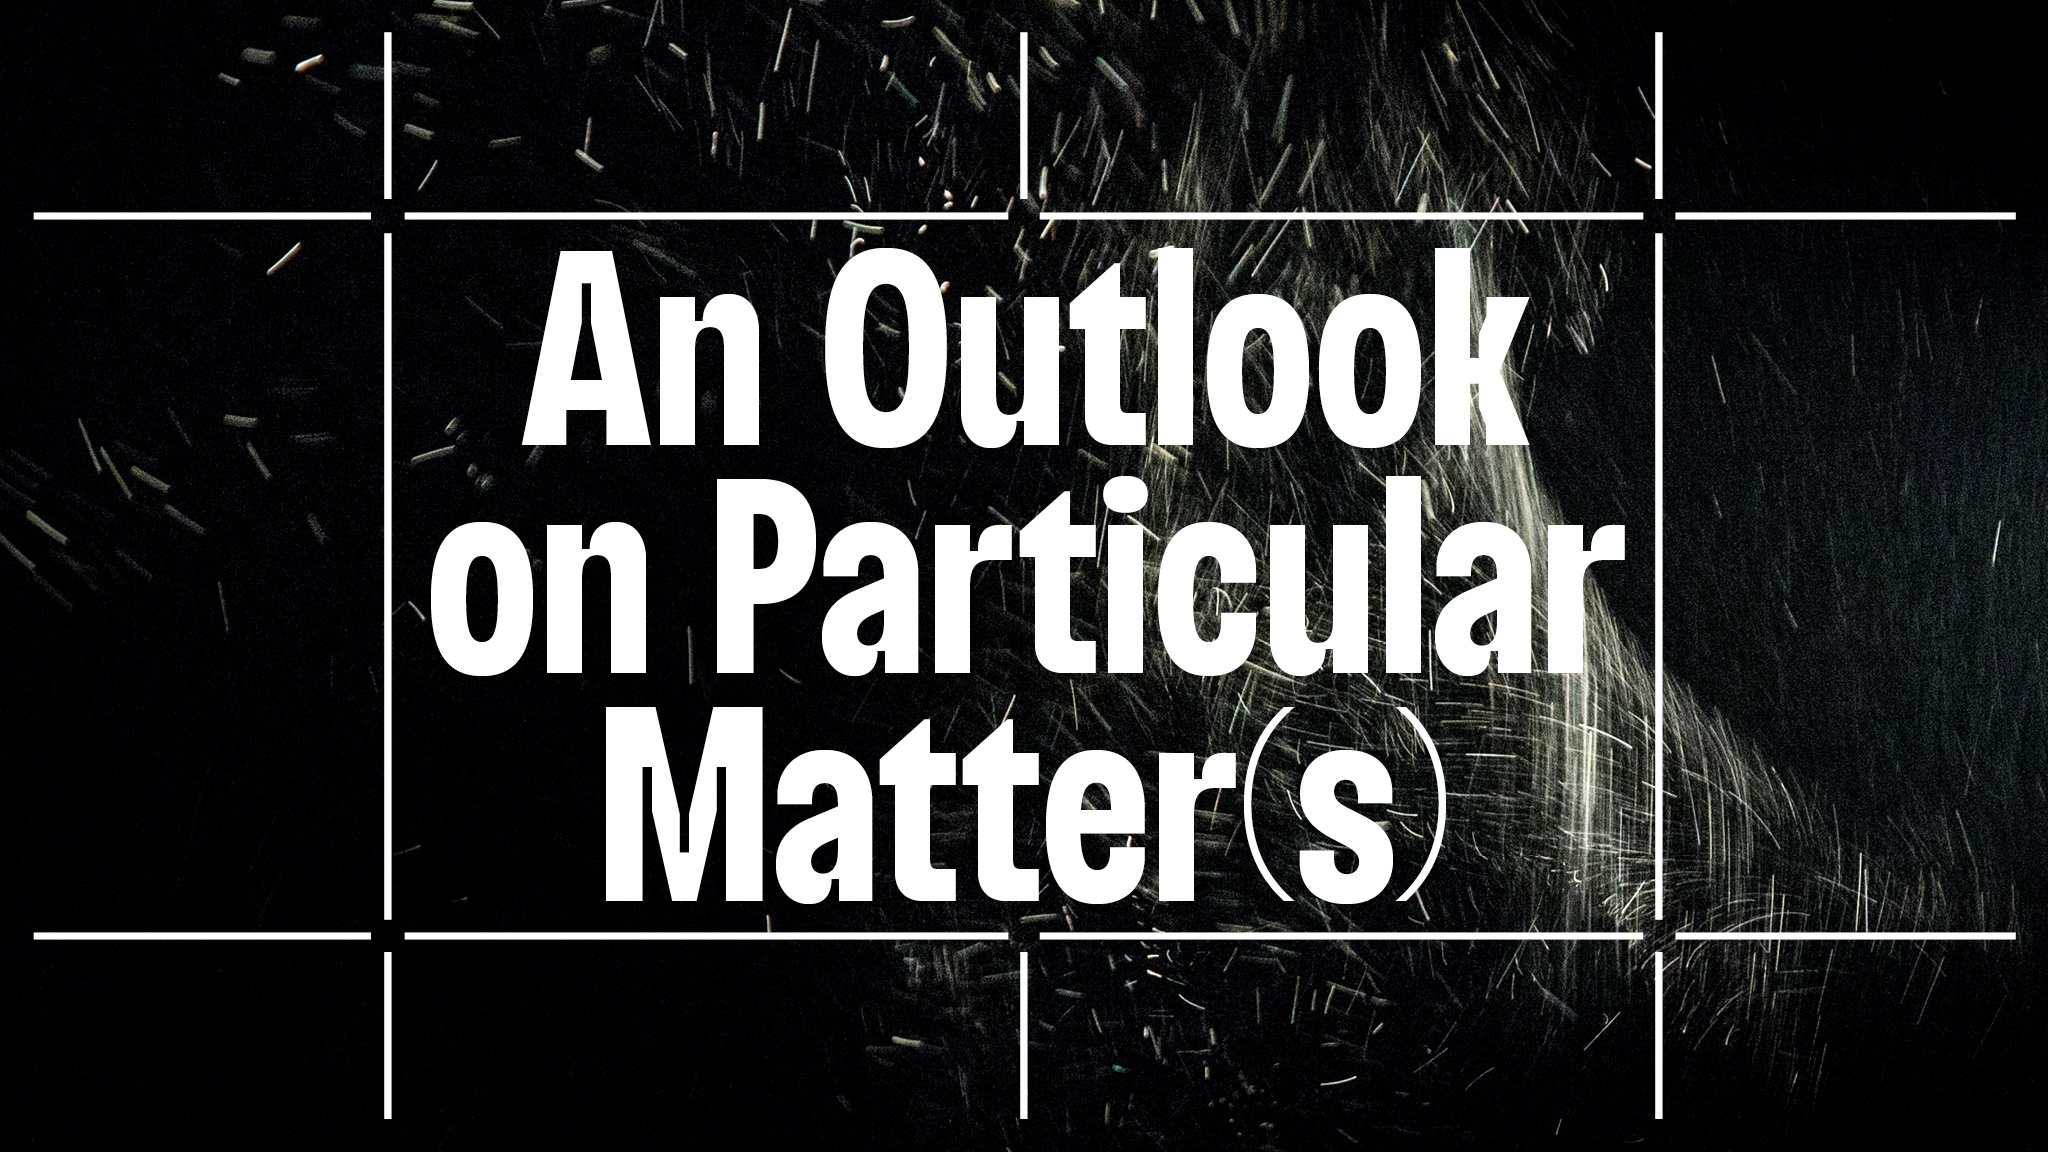 Illuminated specks of dust whizz through the air in a darkened gallery. Overlaid on the image is the program title "An Outlook on Particular Matters".